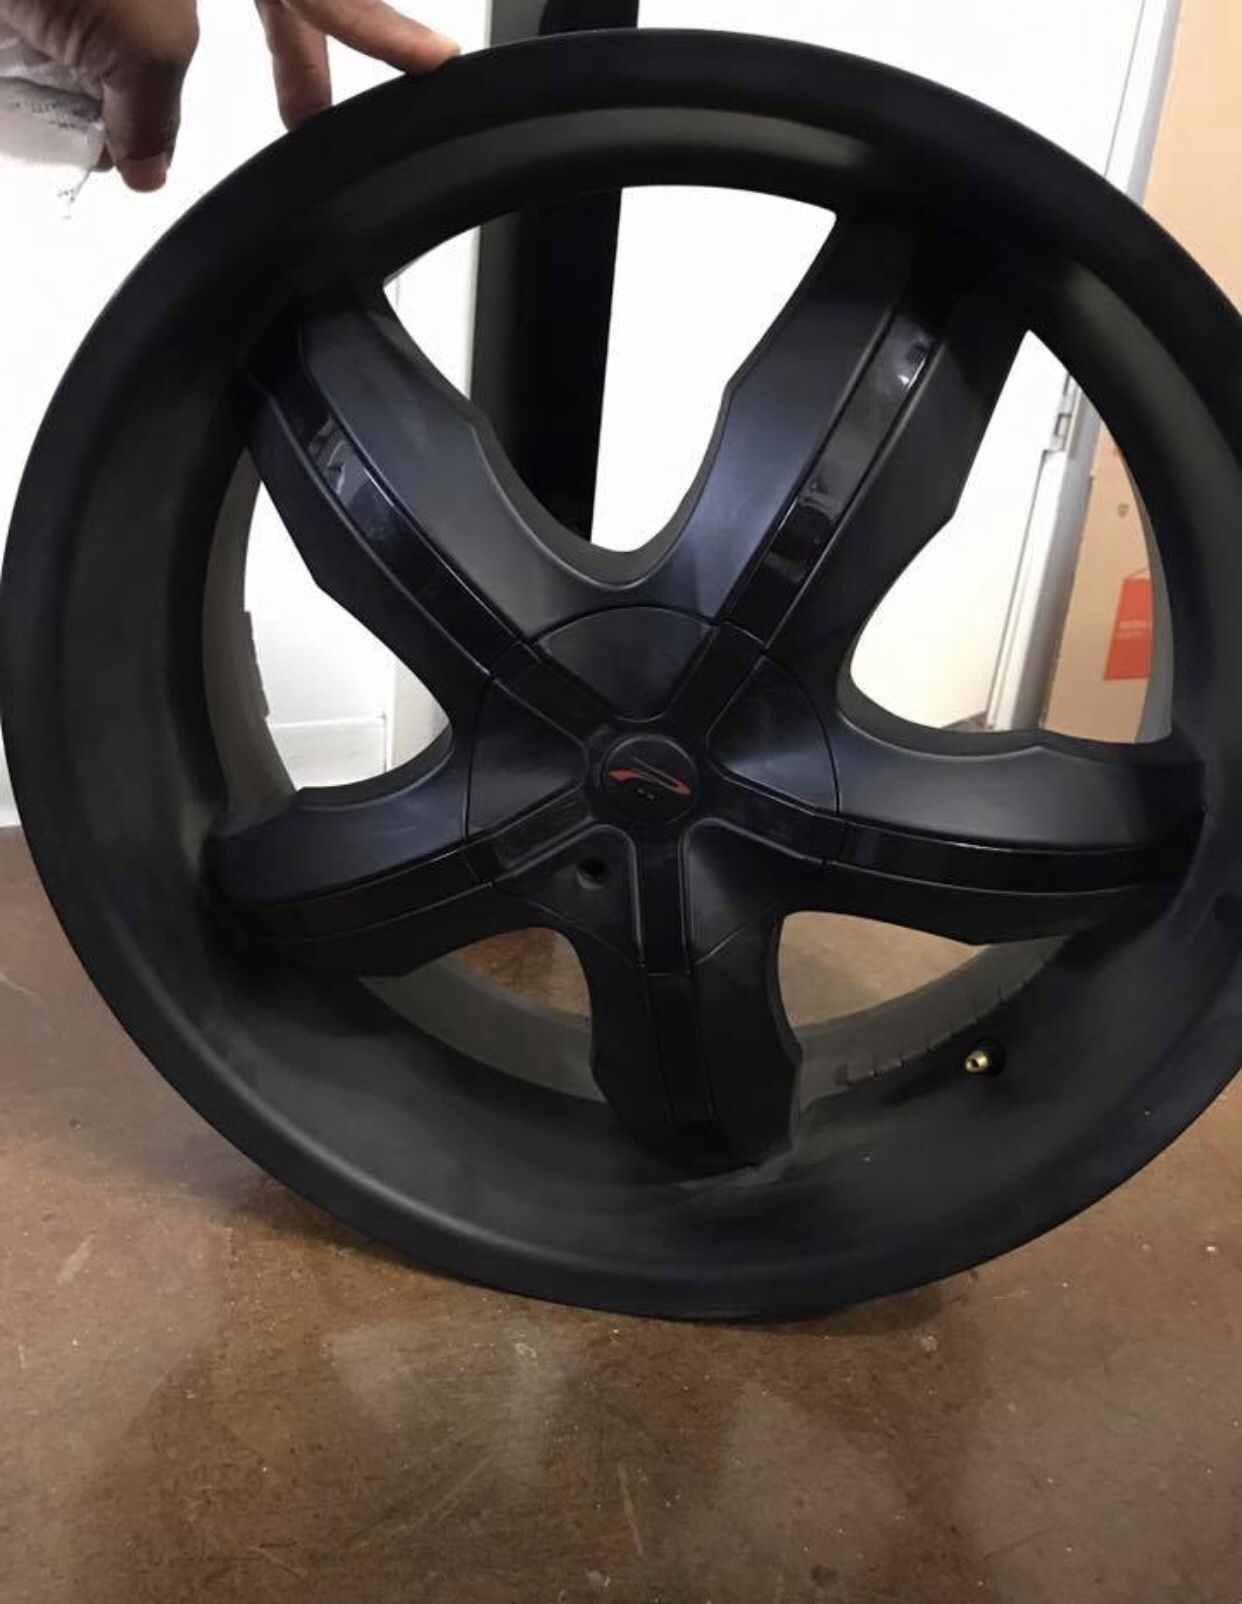 A Set Of Four 20" Black Pirelli Rims For Sale $500. Awesome Condition. Have To Go Asap!